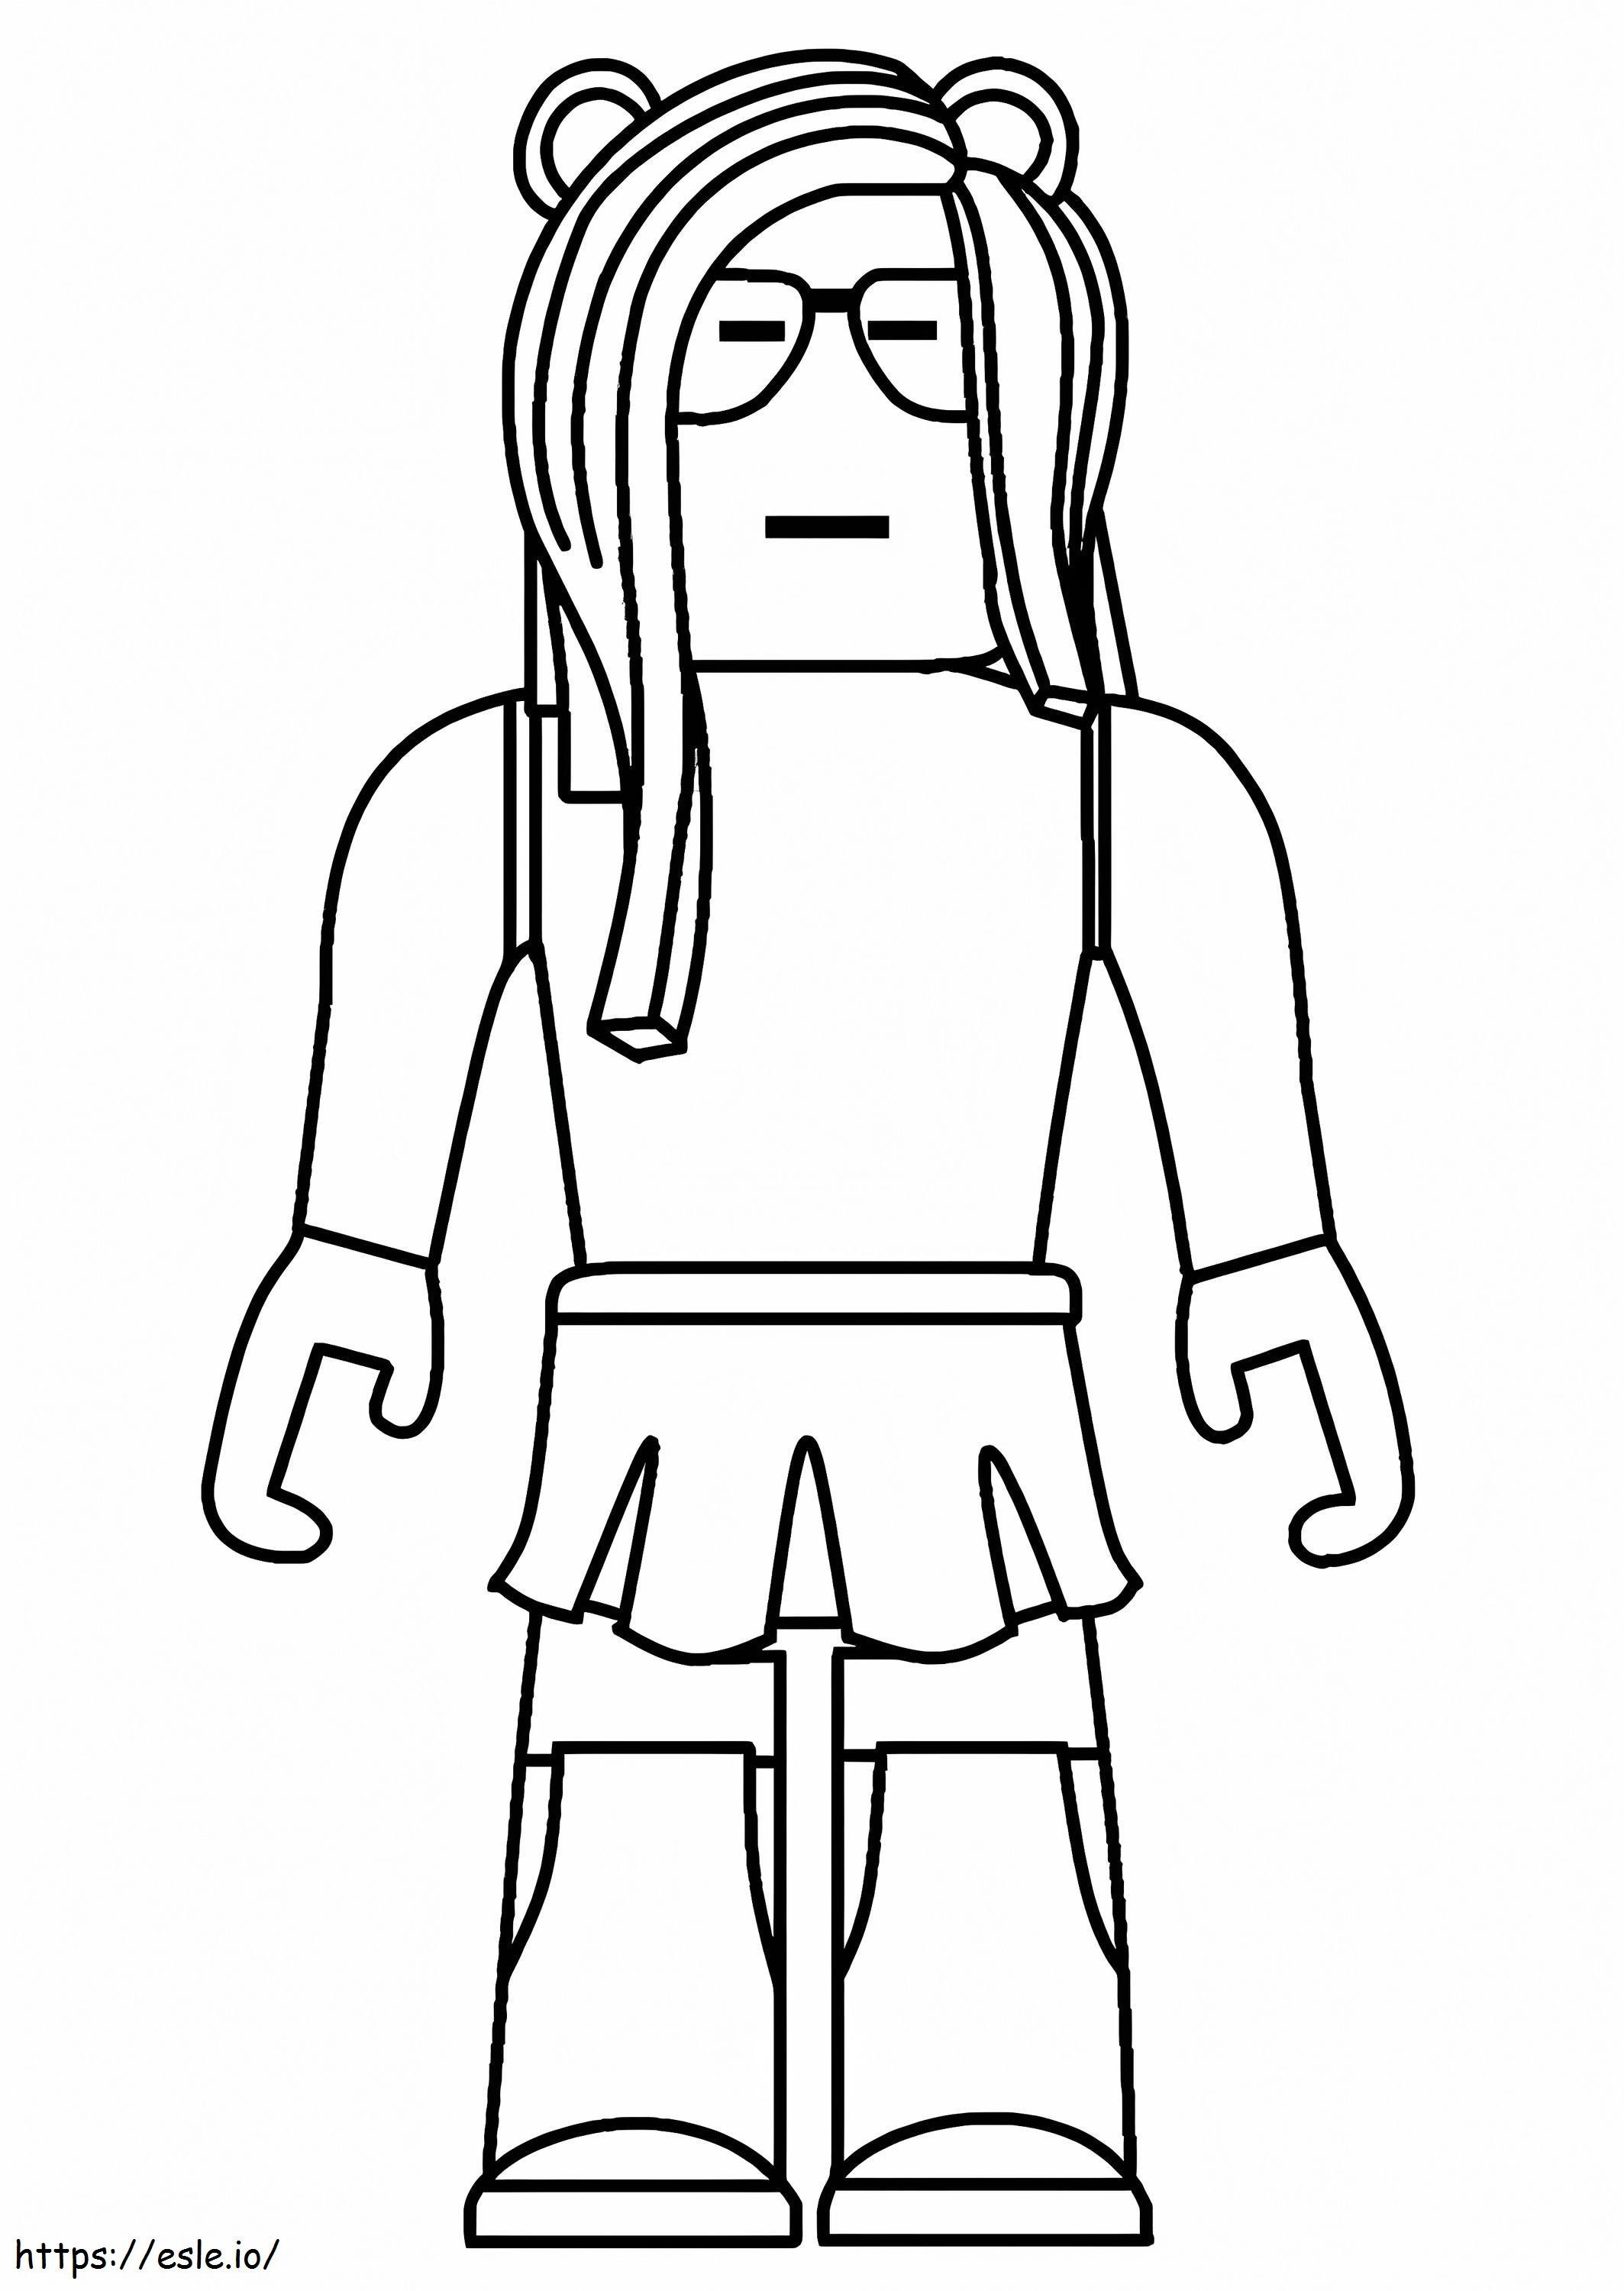 Roblox 2 coloring page